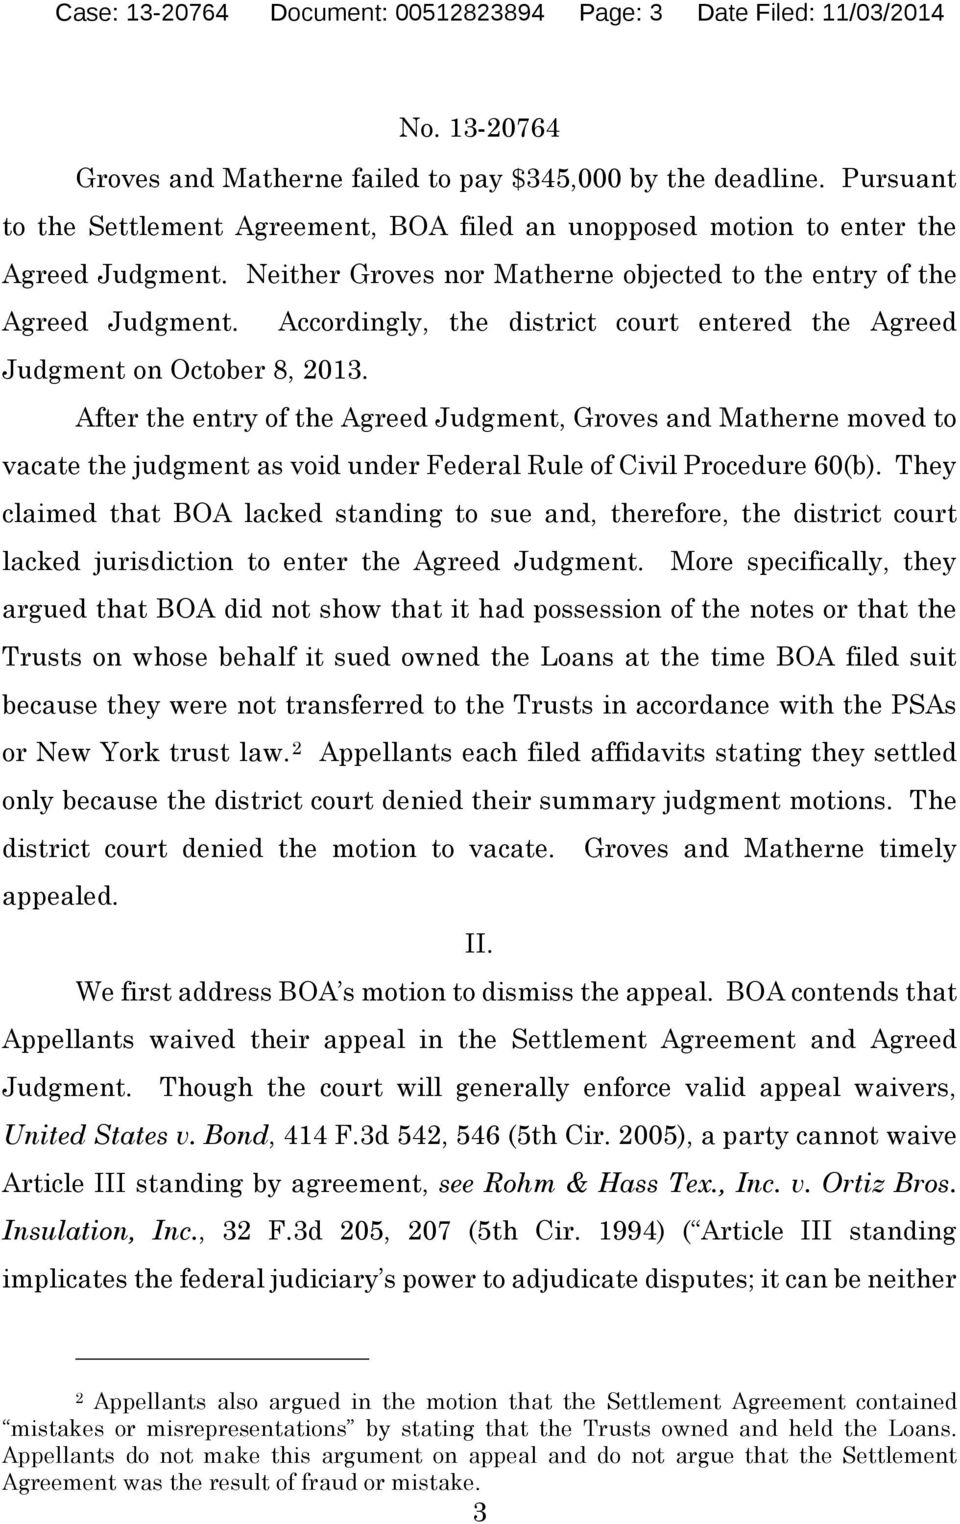 Accordingly, the district court entered the Agreed Judgment on October 8, 2013.